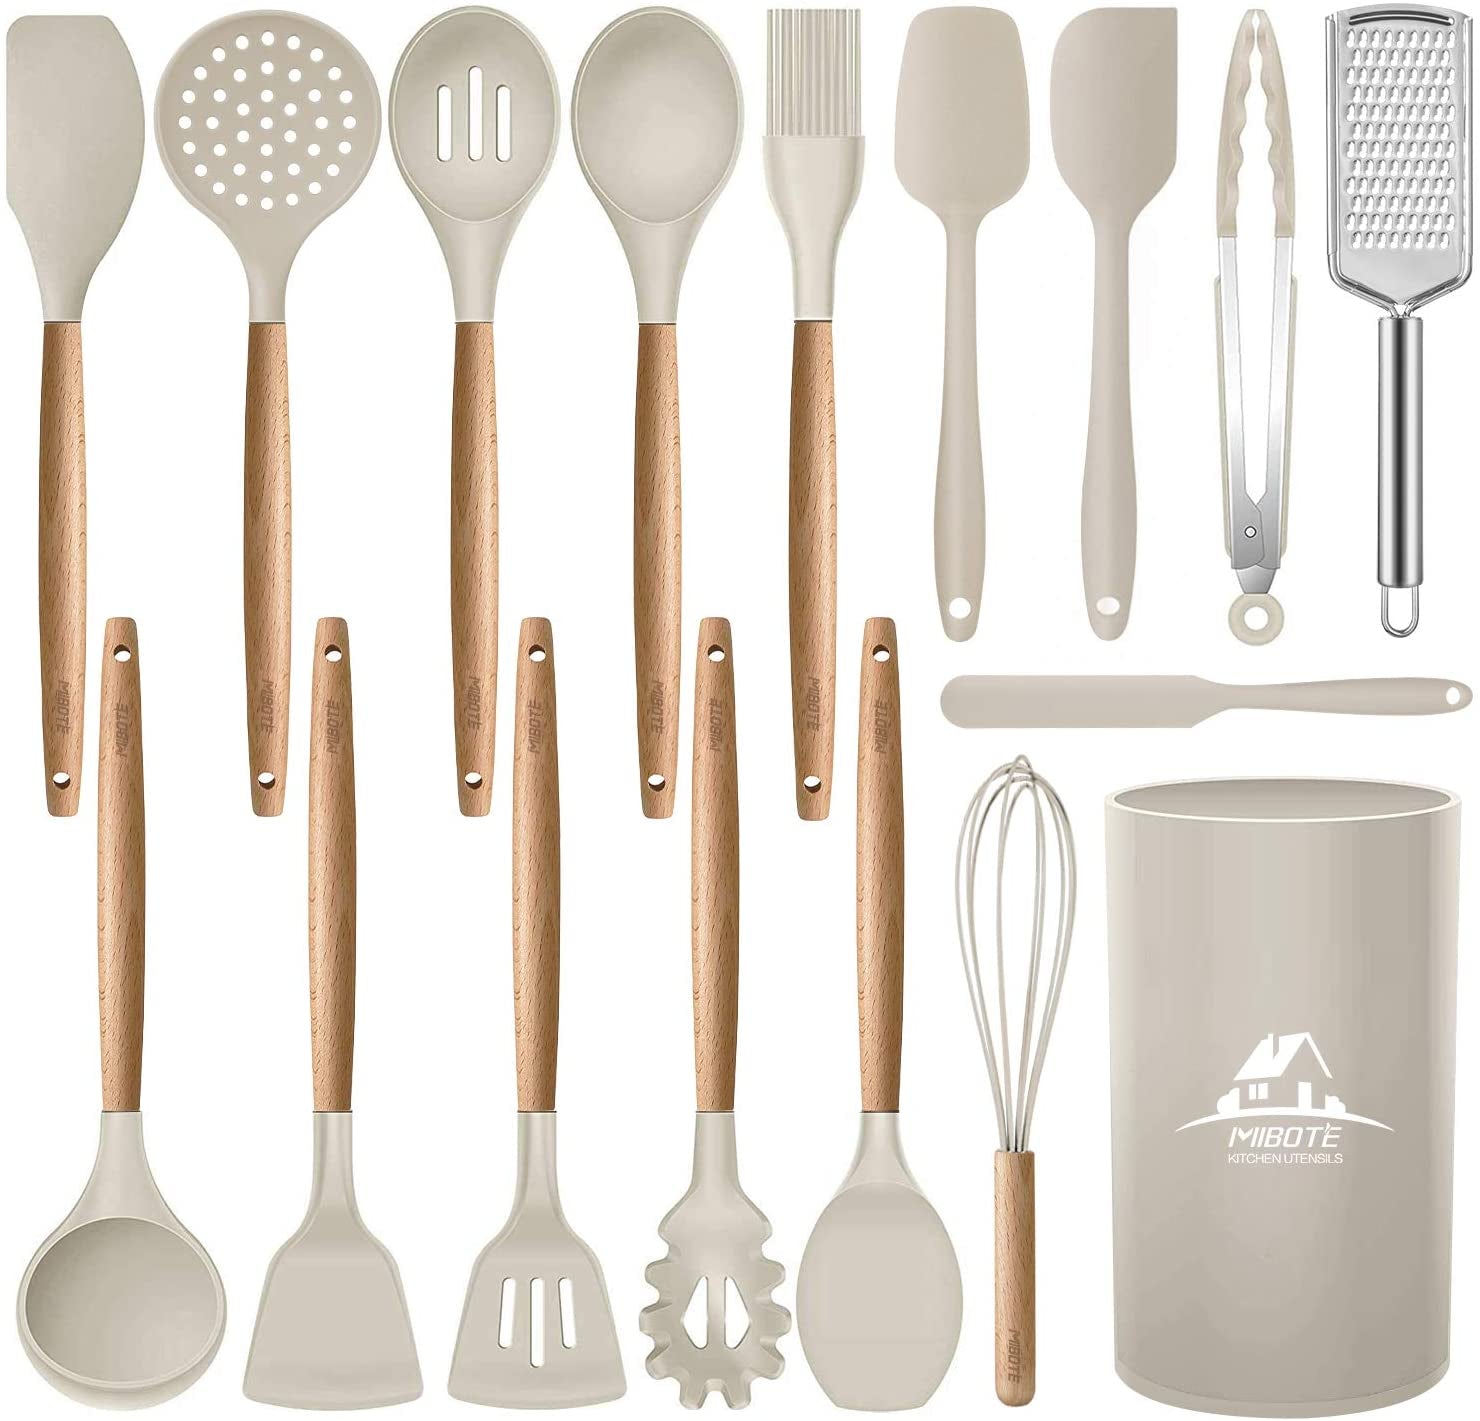 17 Pcs Silicone Cooking Kitchen Utensils Set with Holder, Wooden Handles BPA Free Non Toxic Silicone Turner Tongs Spatula Spoon Kitchen Gadgets Utensil Set for Nonstick Cookware (Khaki)